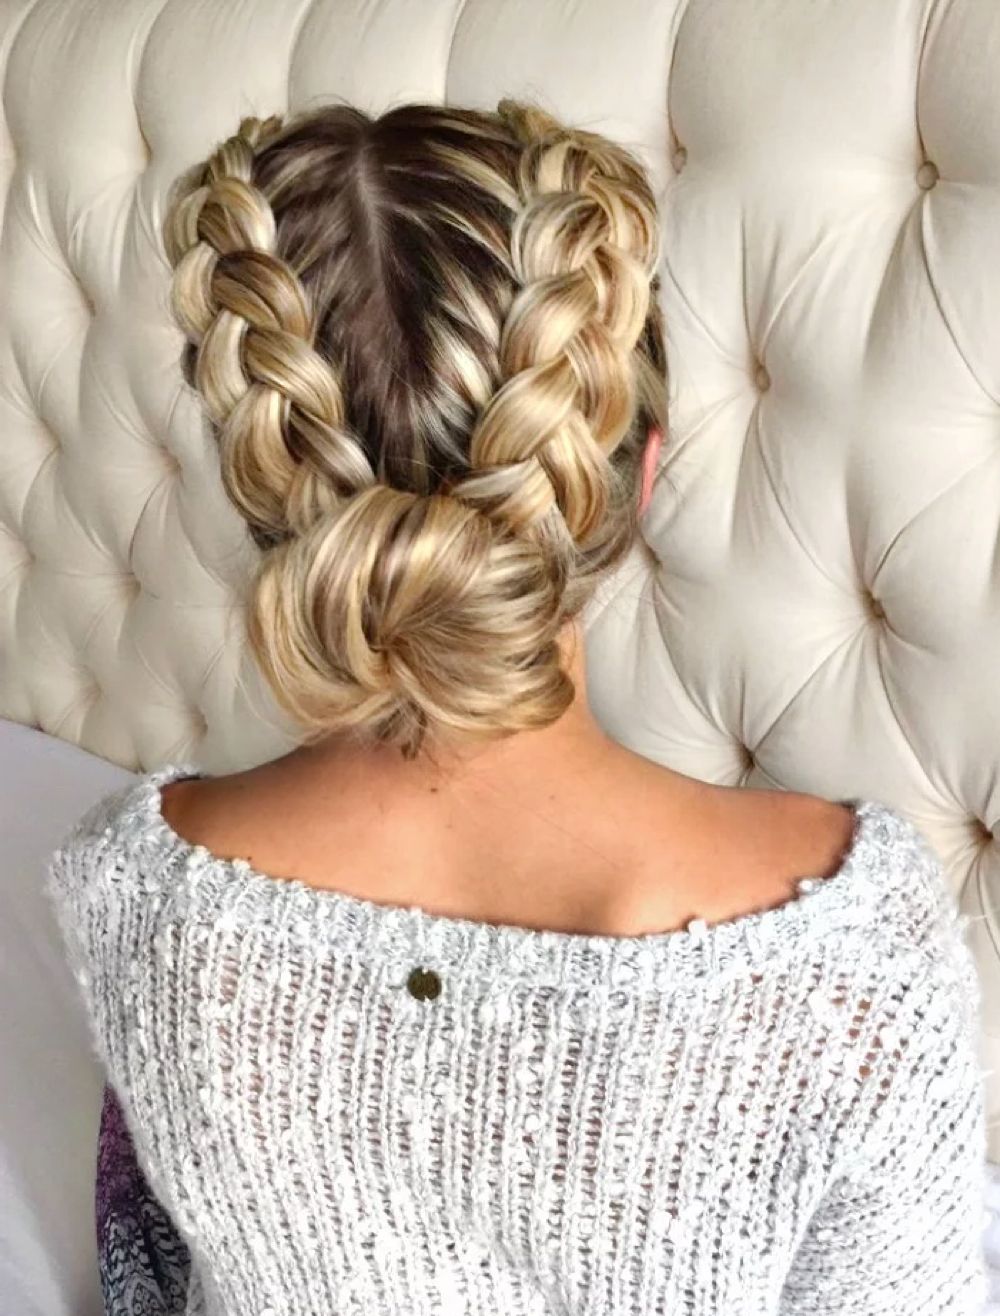 Favorite Tight Black Swirling Under Braid Hairstyles With Regard To 29 Gorgeous Braided Updo Ideas For 2019 (Gallery 19 of 20)